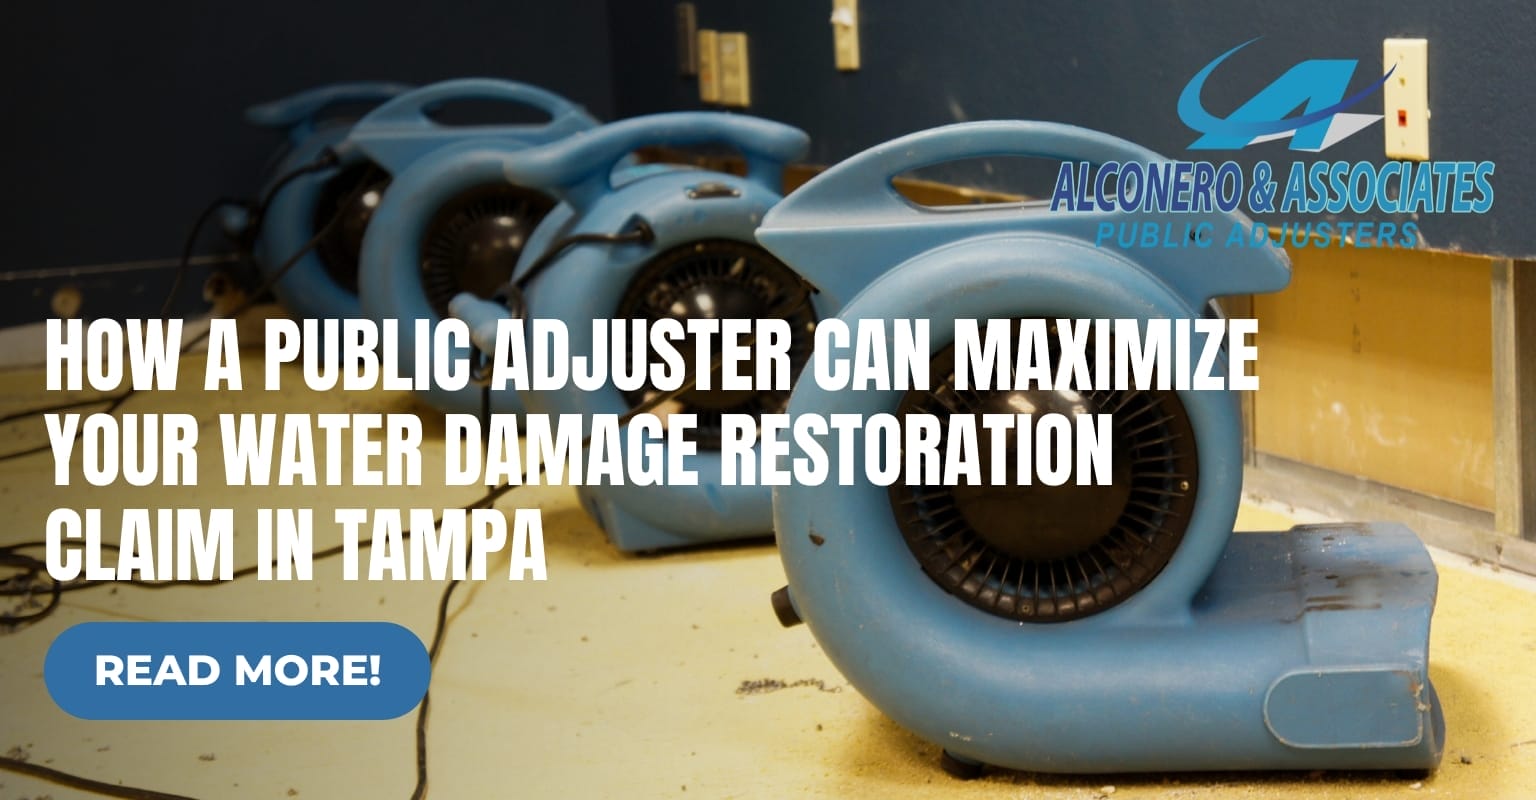 How a Public Adjuster Can Maximize Your Water Damage Restoration Claim in Tampa